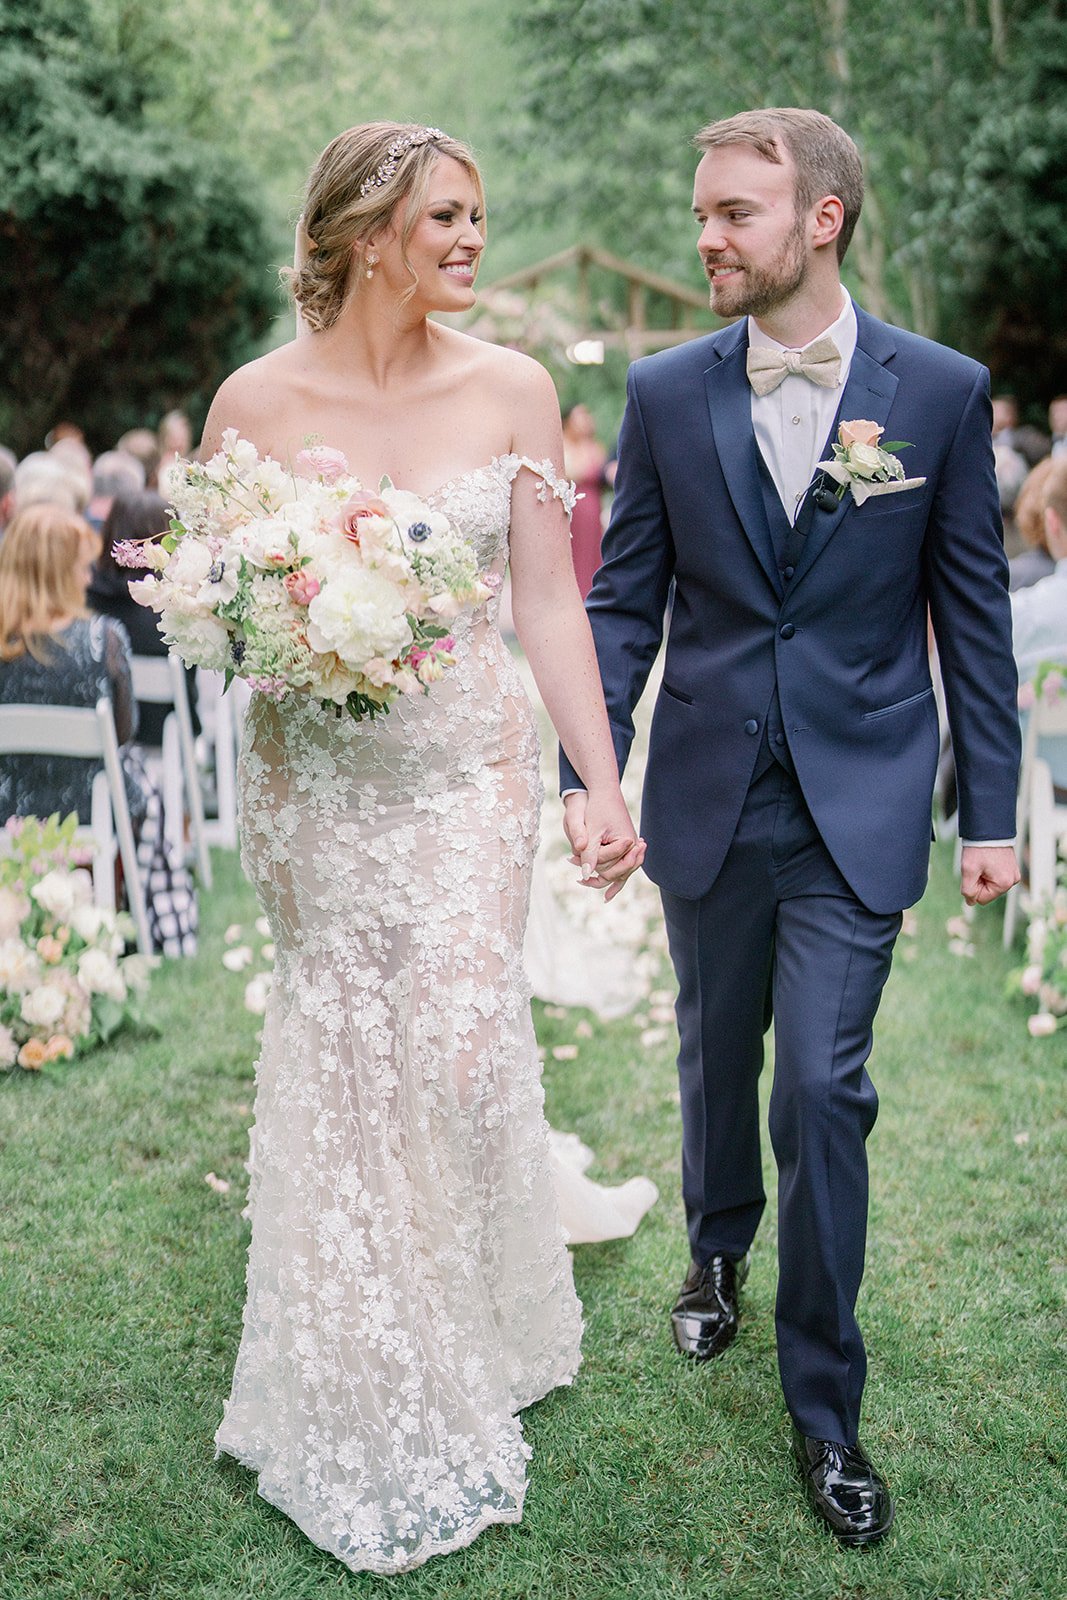 Romantic outdoor wedding with blush, white and green floral